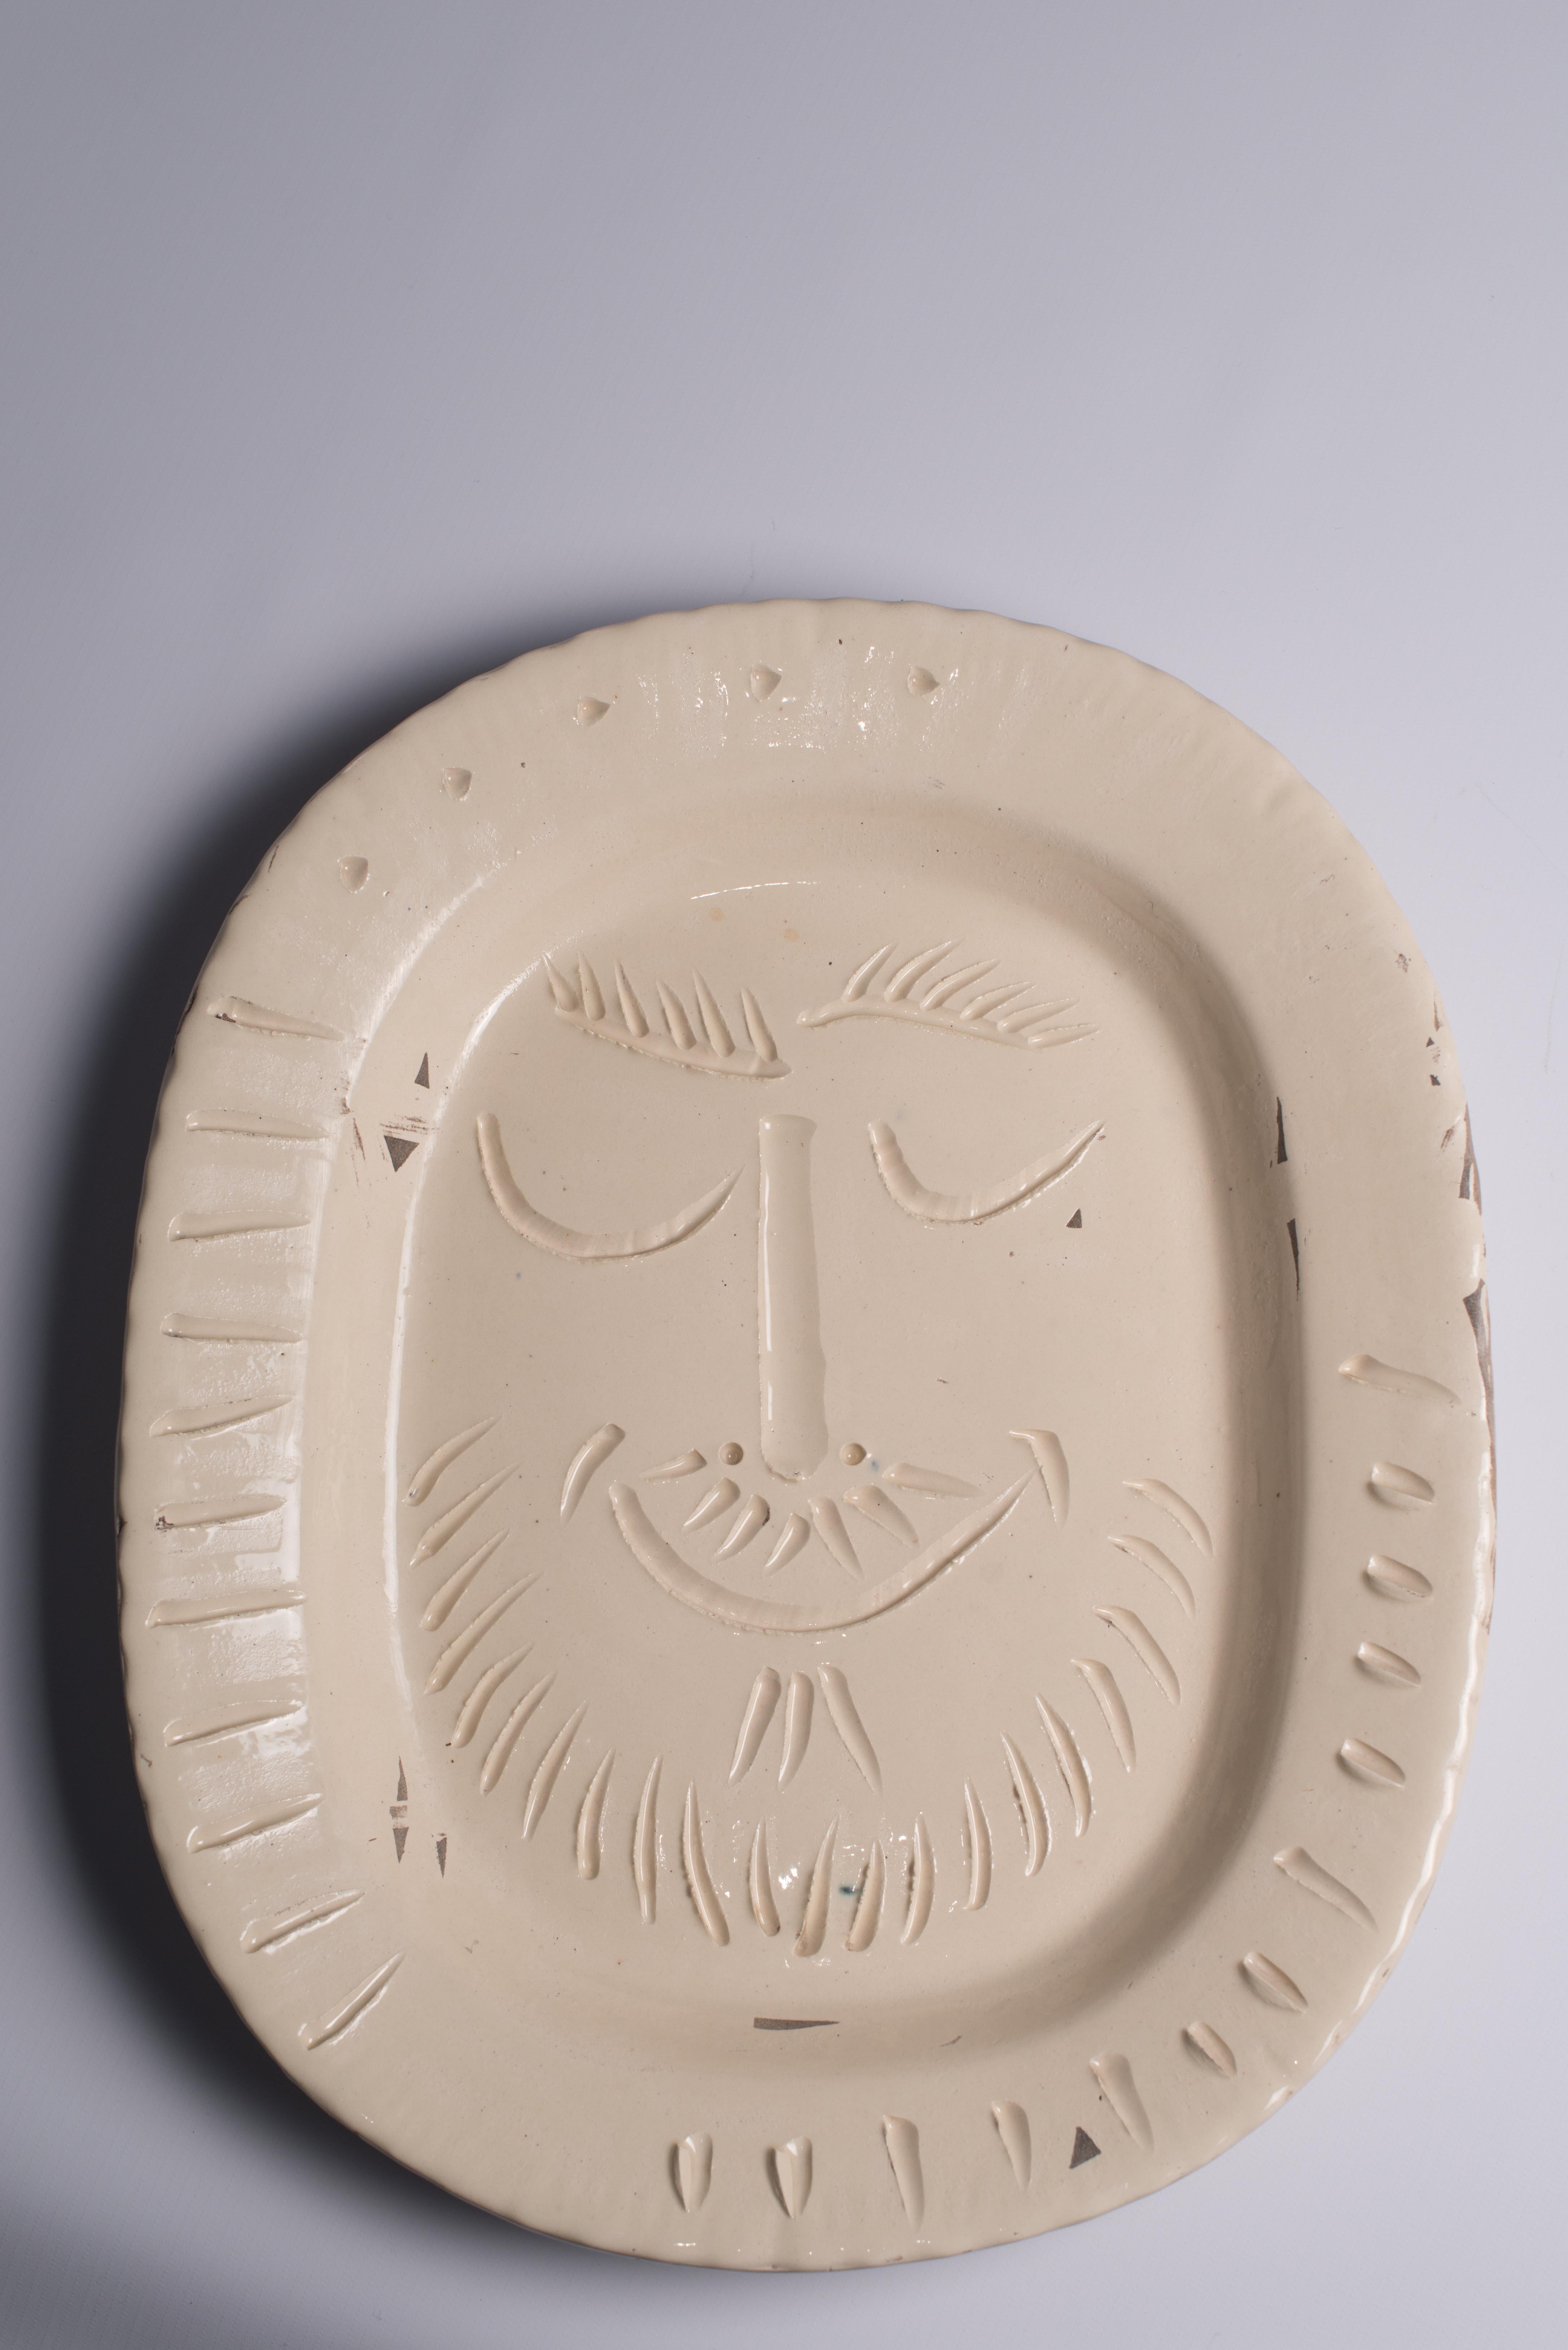 Pablo Picasso 'man's face', dish of white earthenware by Madoura factory, 1955


Pablo Picasso (1881 Malaga, Spain – 1973 Mougins, France)
Man’s face, 1955 a Rounded rectangular dish of white earthenware clay, knife engraved decoration under